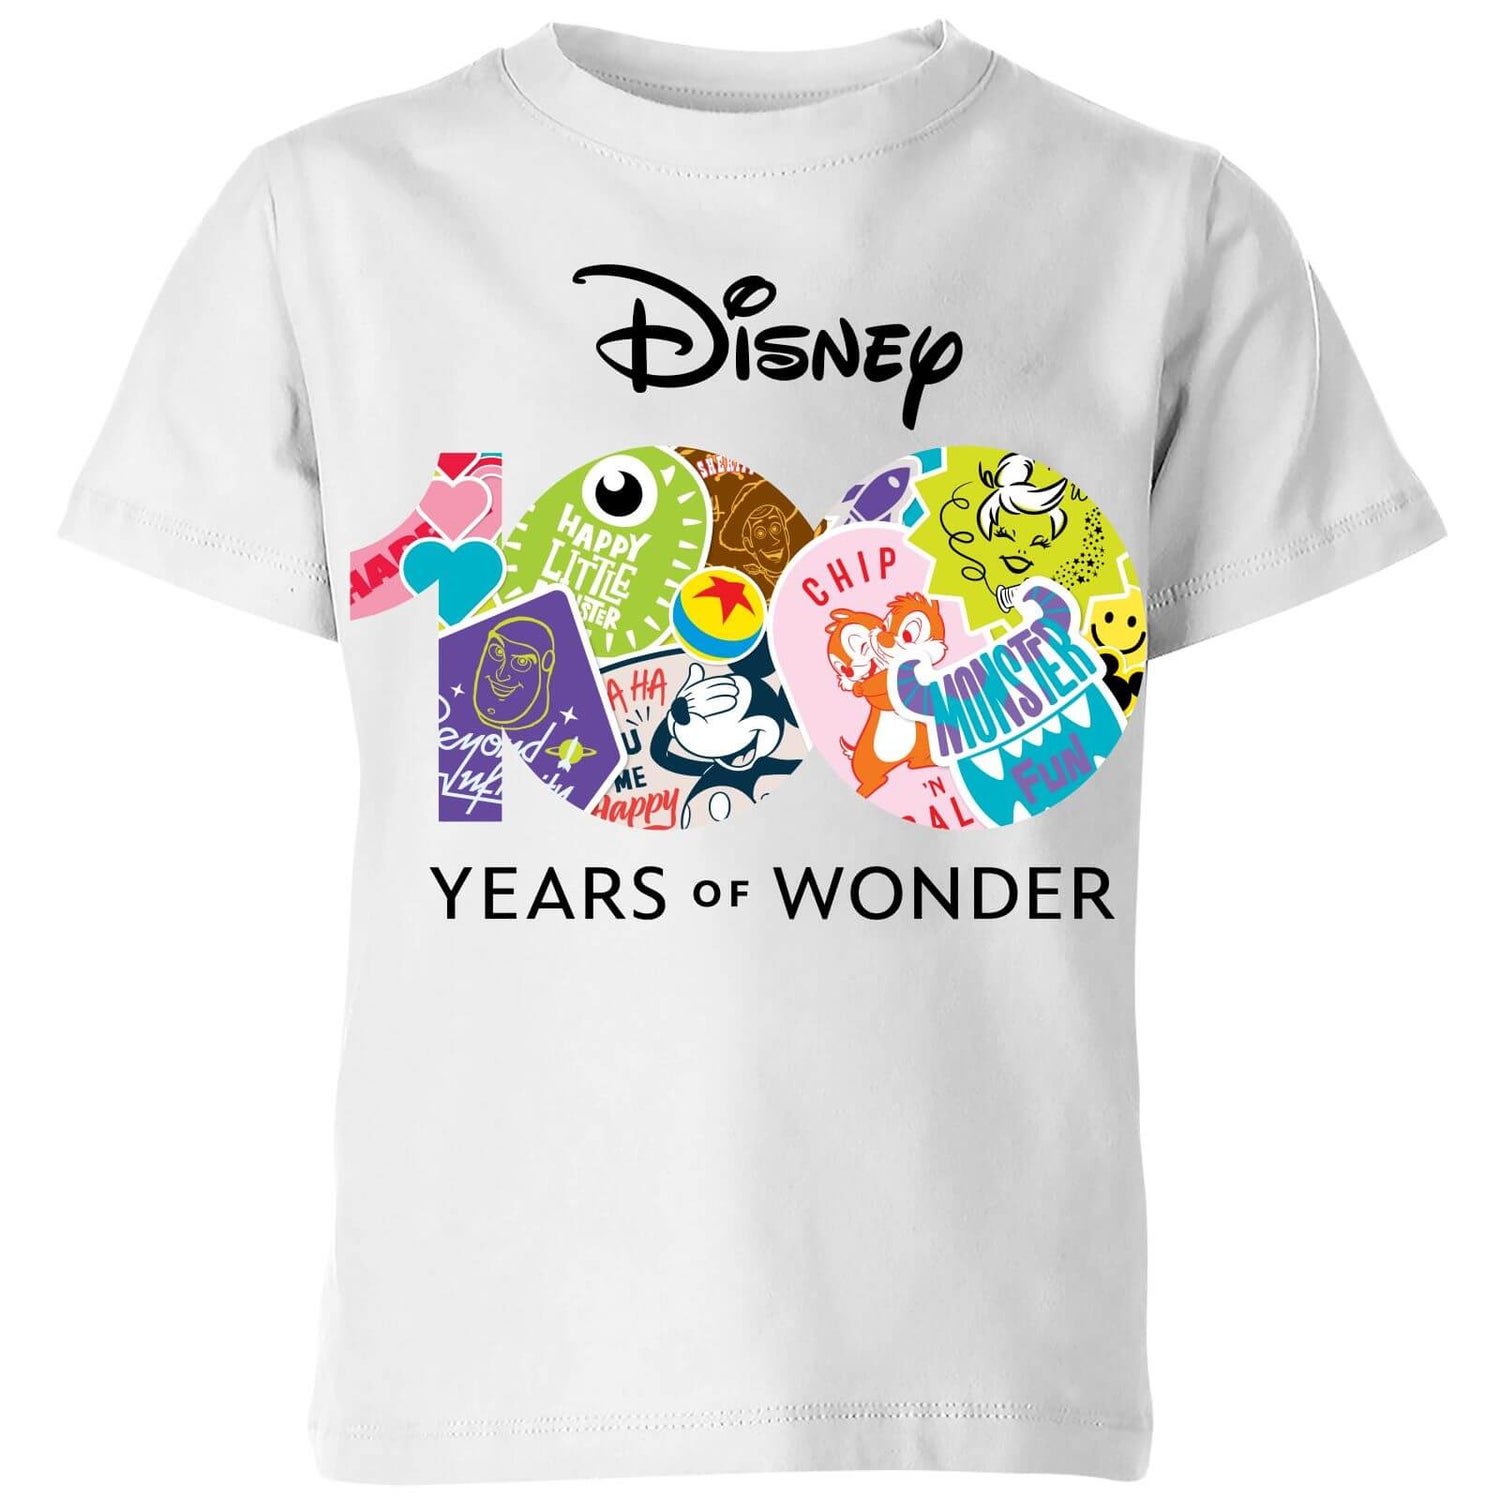 Disney Stitch Front And Back Shirt Space City Kids Clothing